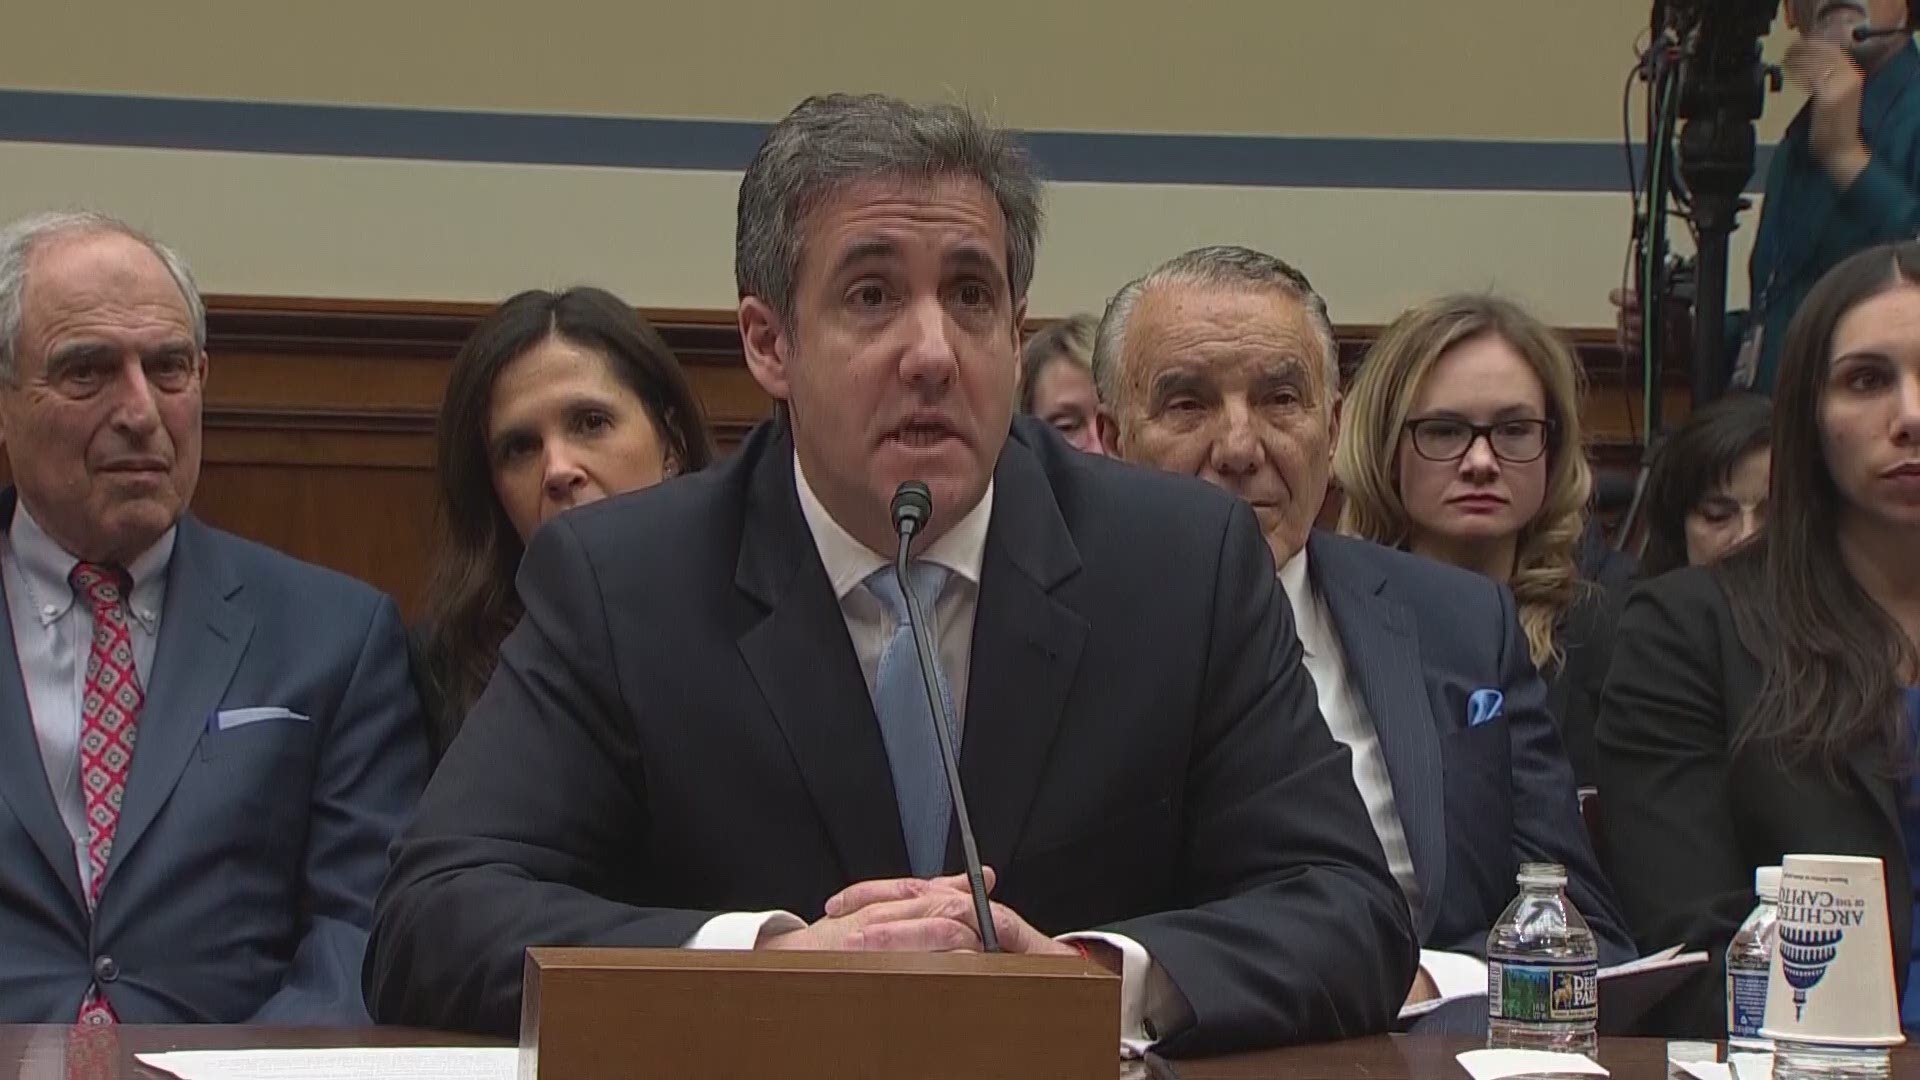 "I am going to prison. I will be away from my wife and family for years," Cohen said as he disputed Jordan's claim that he was not remorseful for his crimes.